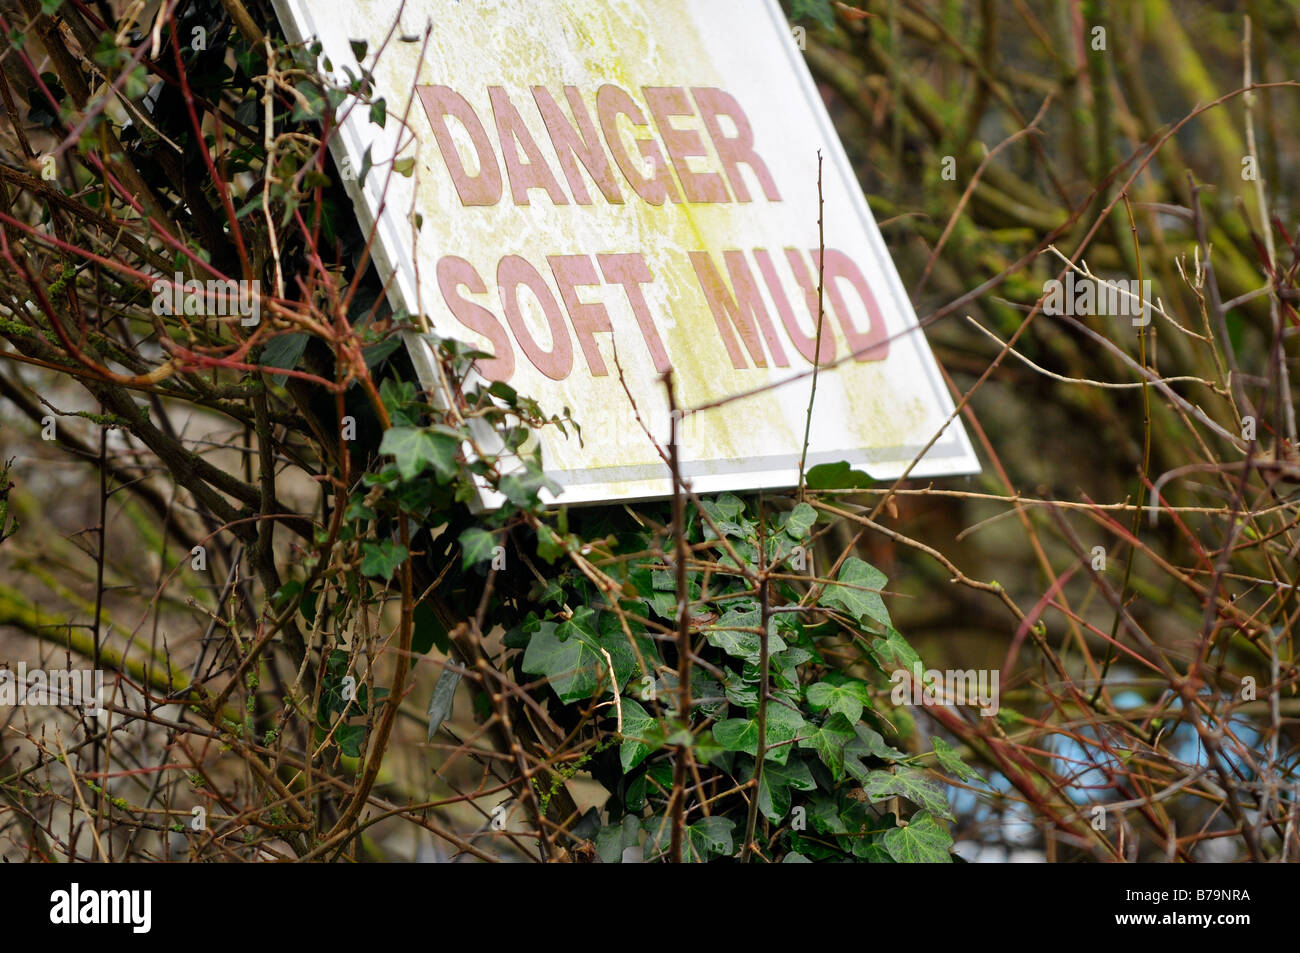 danger soft mud sign on the sea shore seaside in woodland warning of dangers to walkers Stock Photo